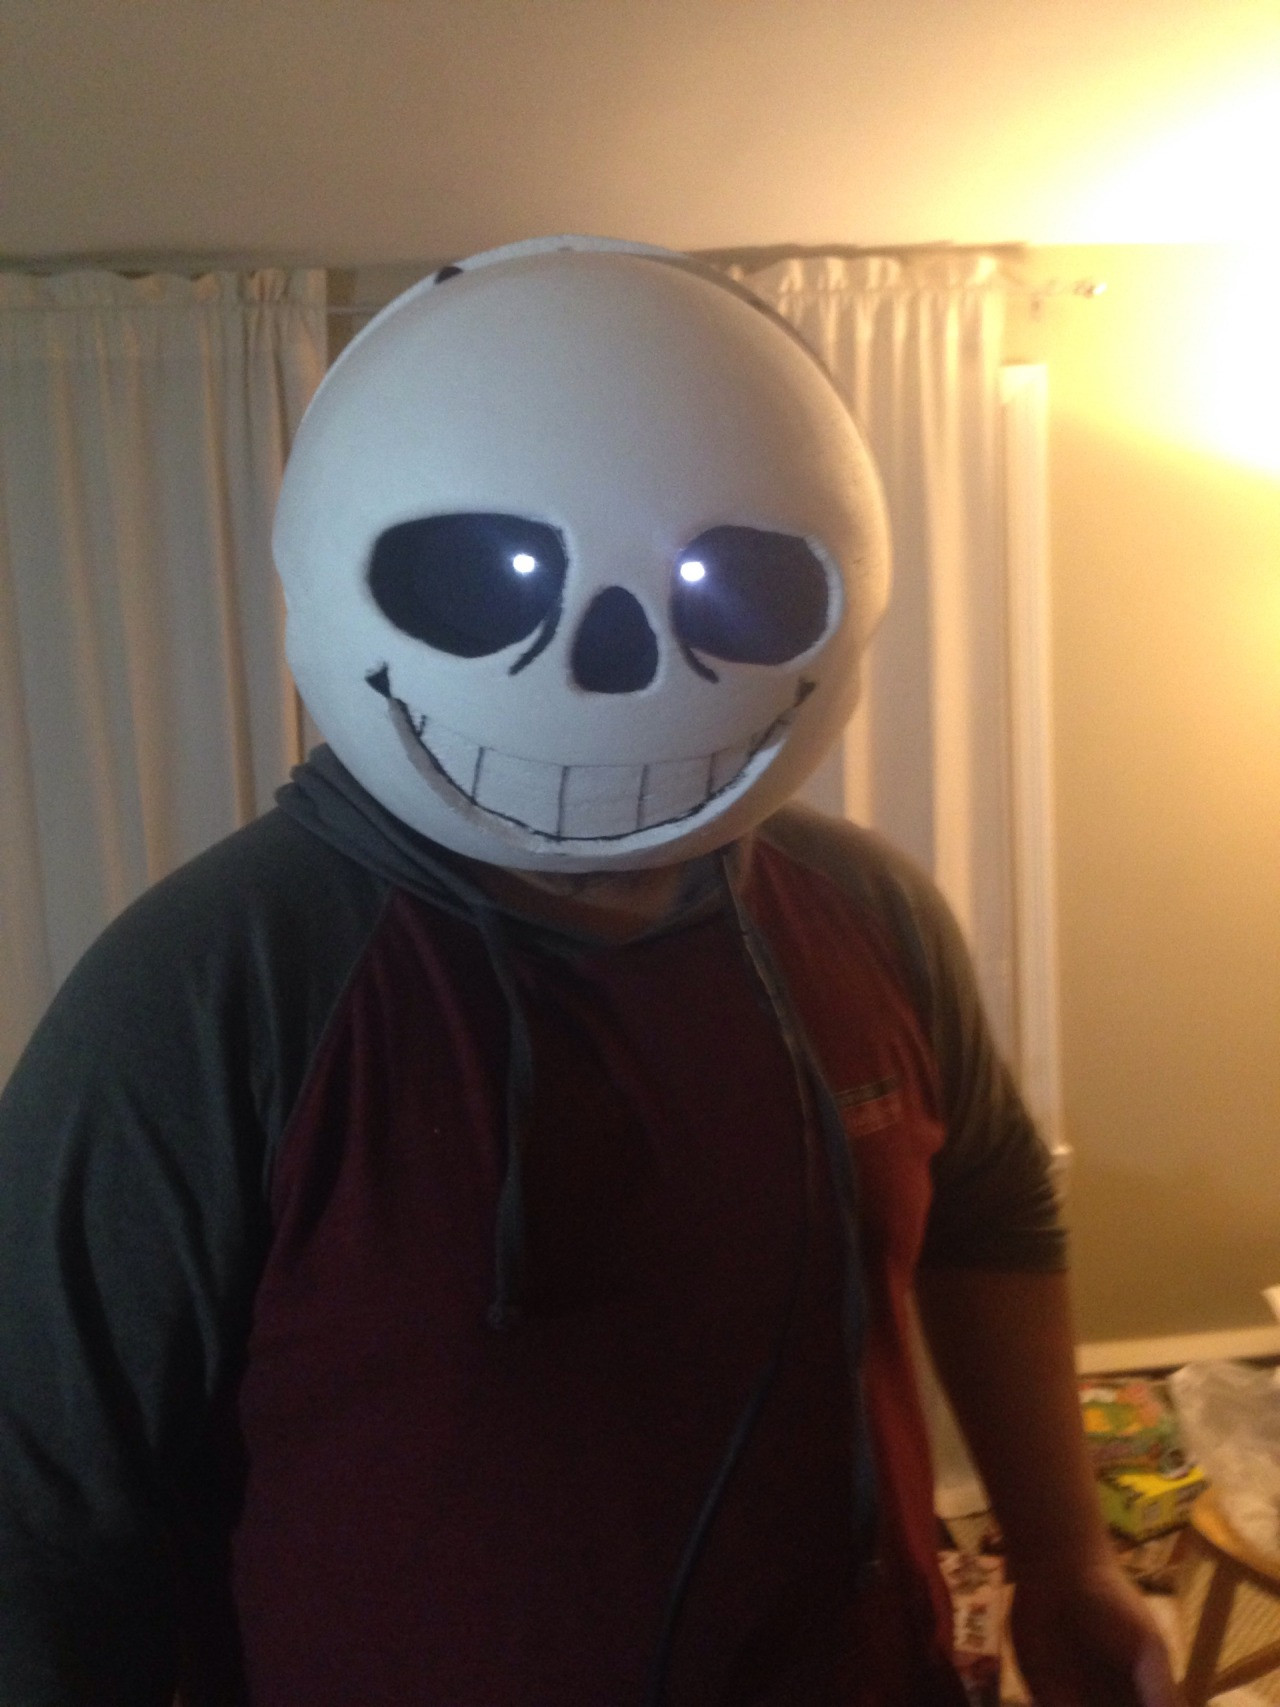 DIY Sans Mask
 Oh Hey There Friendo — So my roommate asked me to design